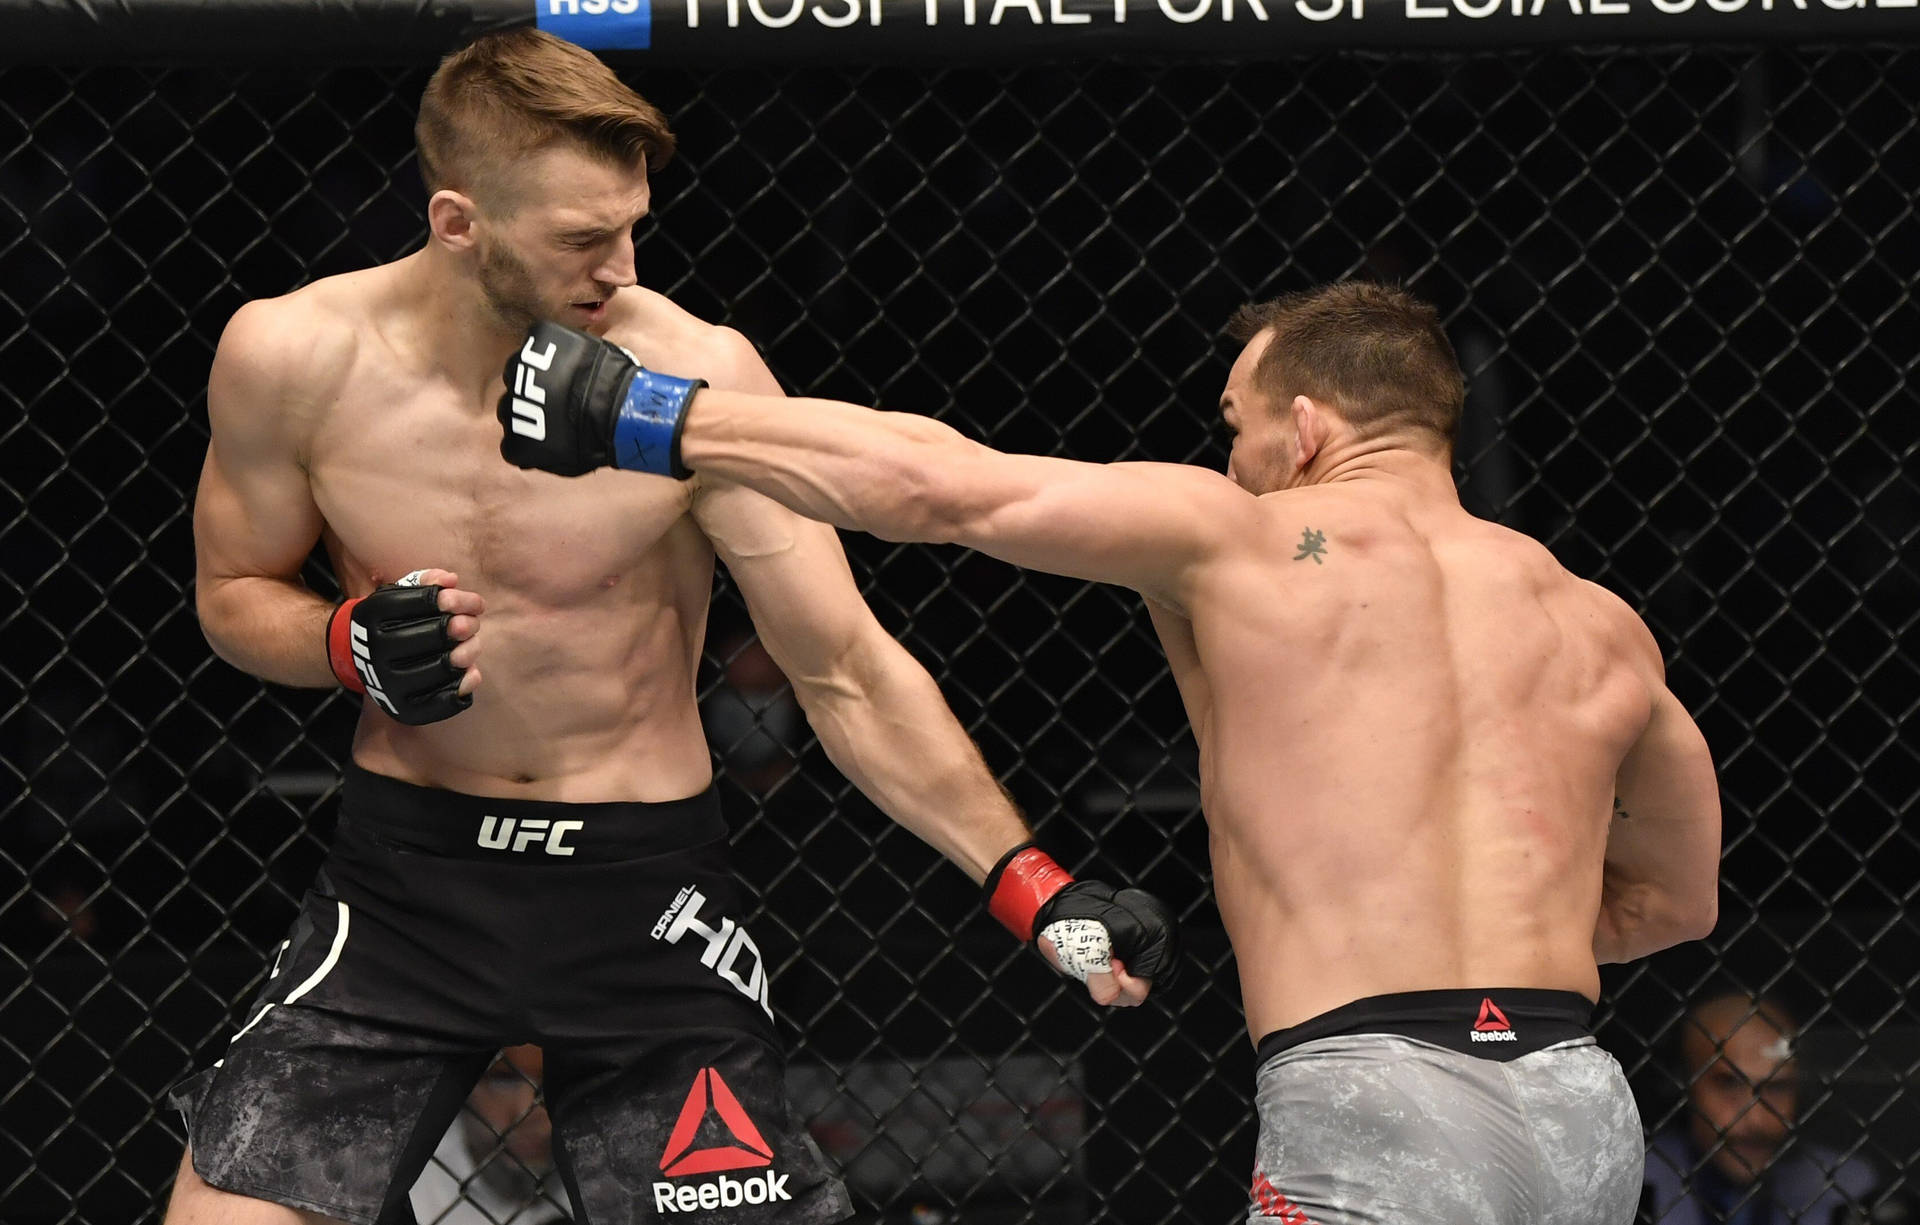 Action packed moment of Dan Hooker in a UFC Fight Wallpaper